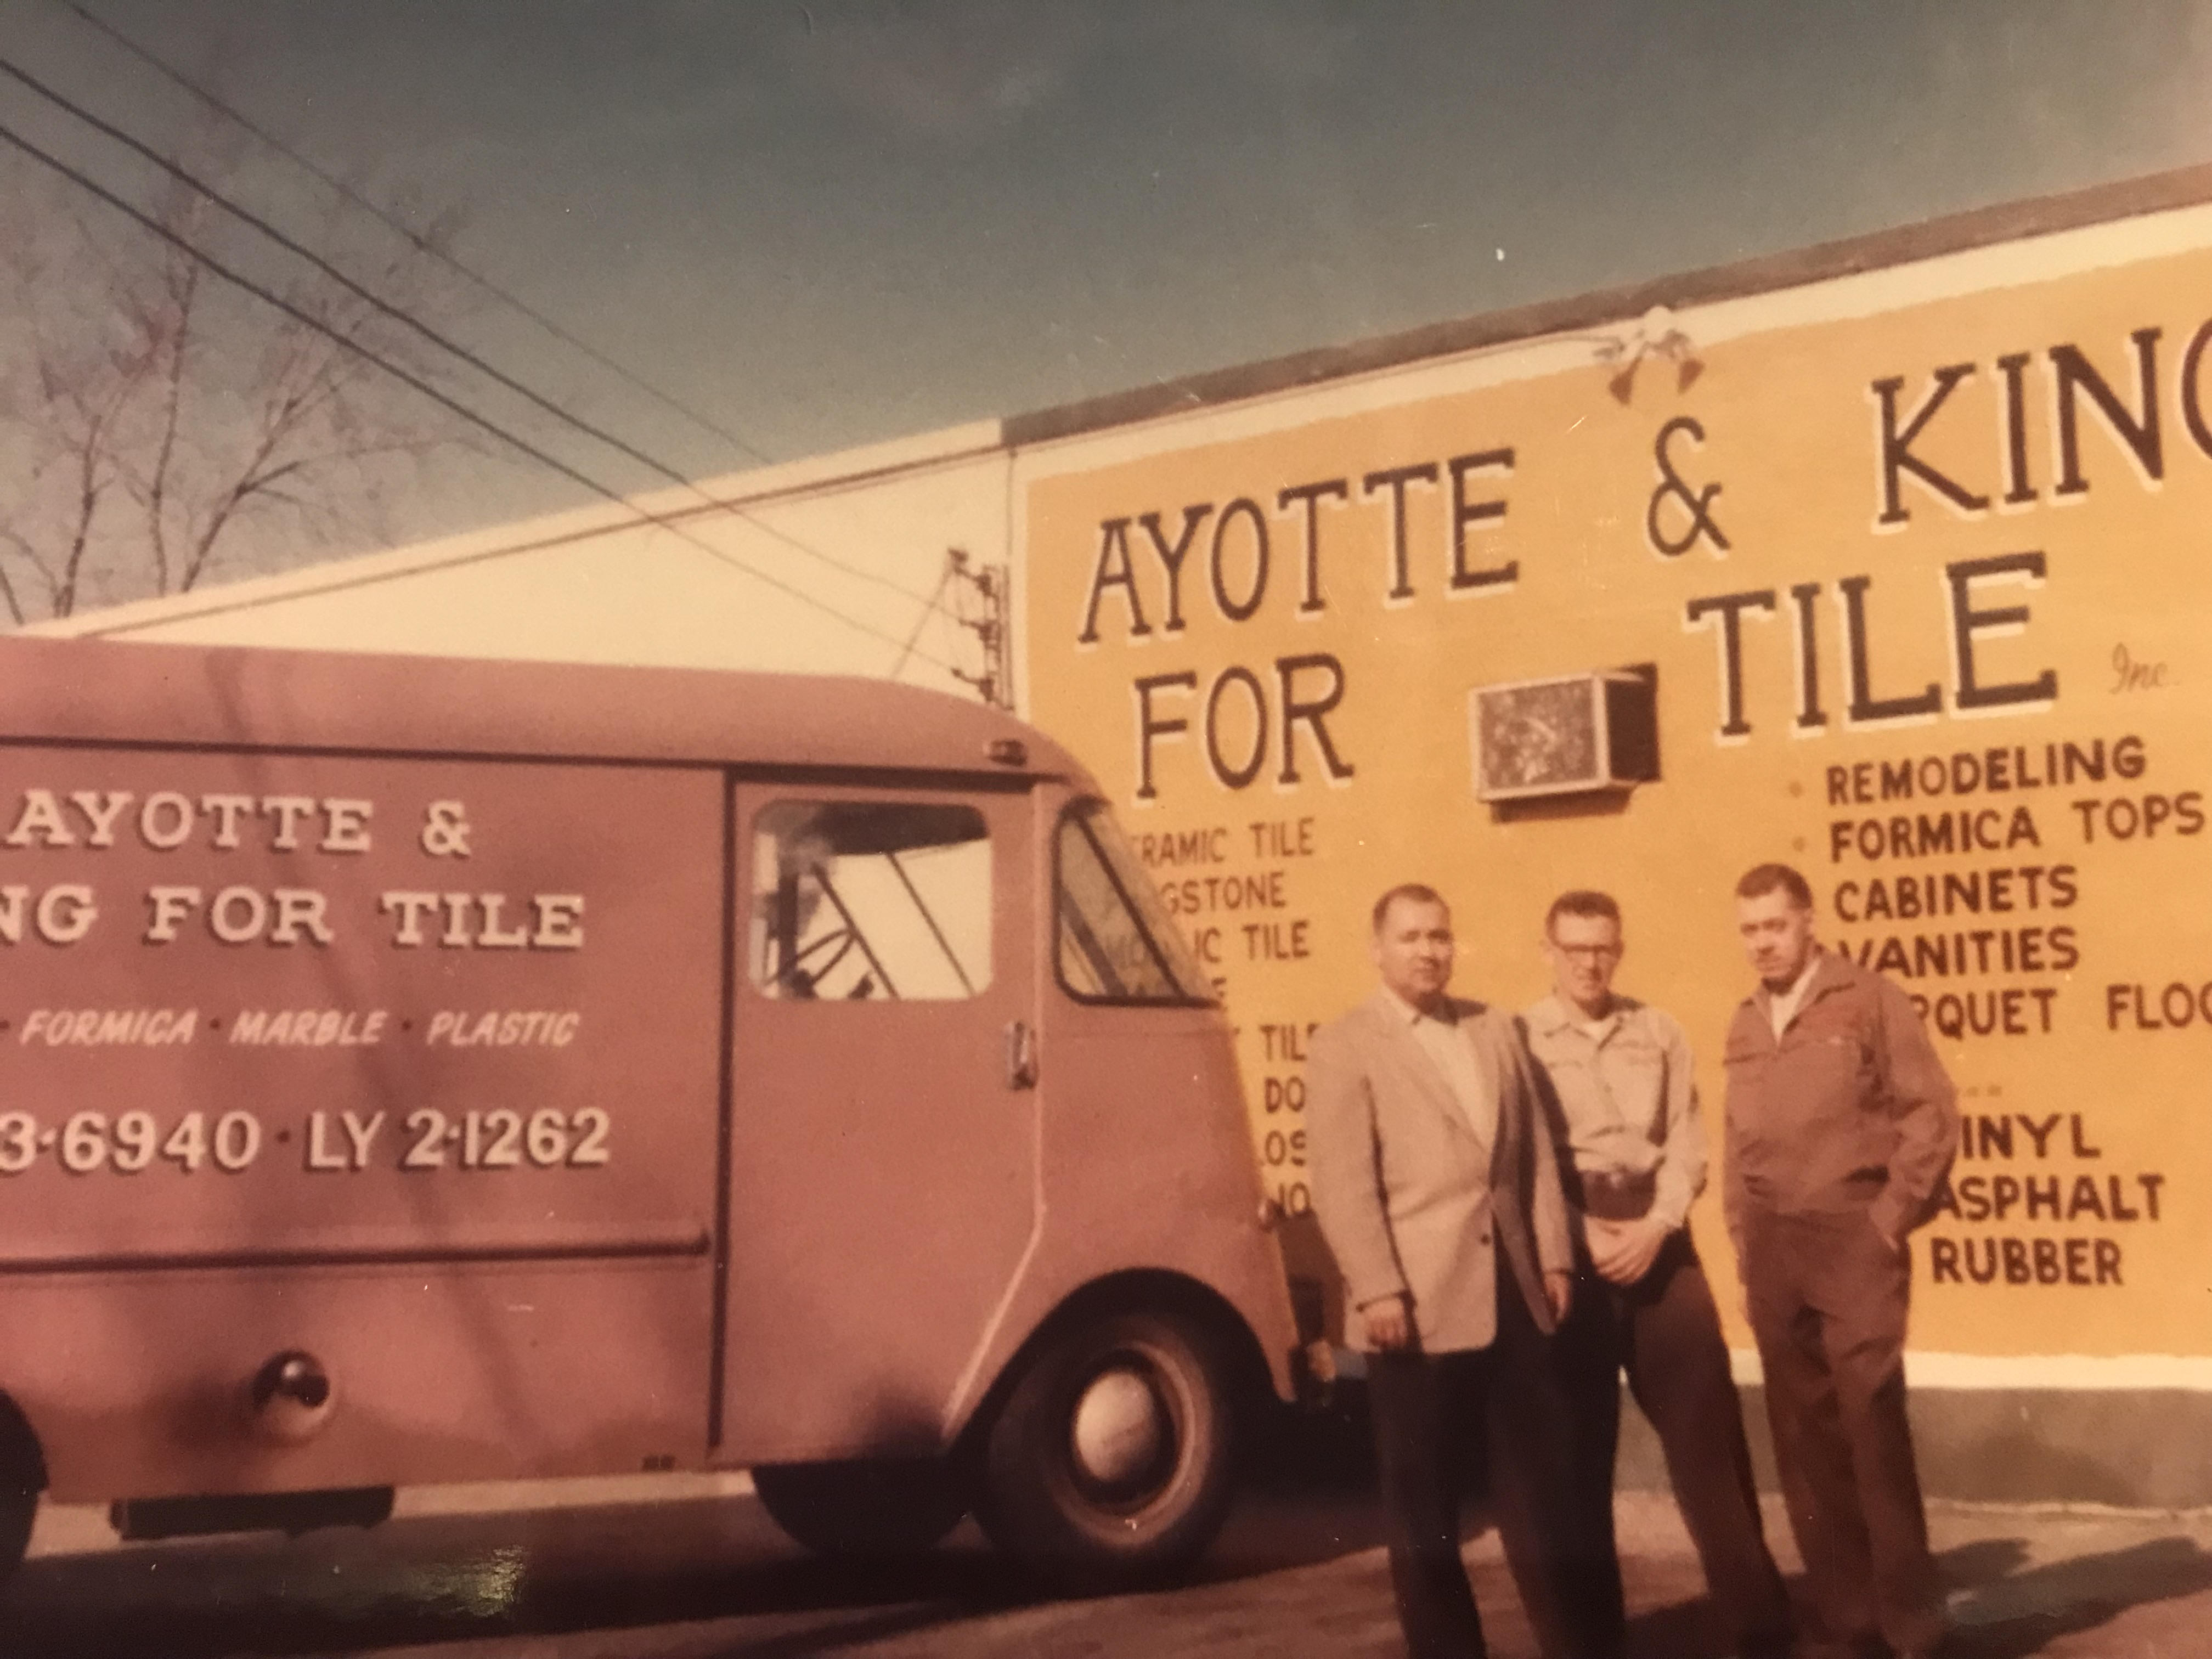 Ayottes king in front of old van